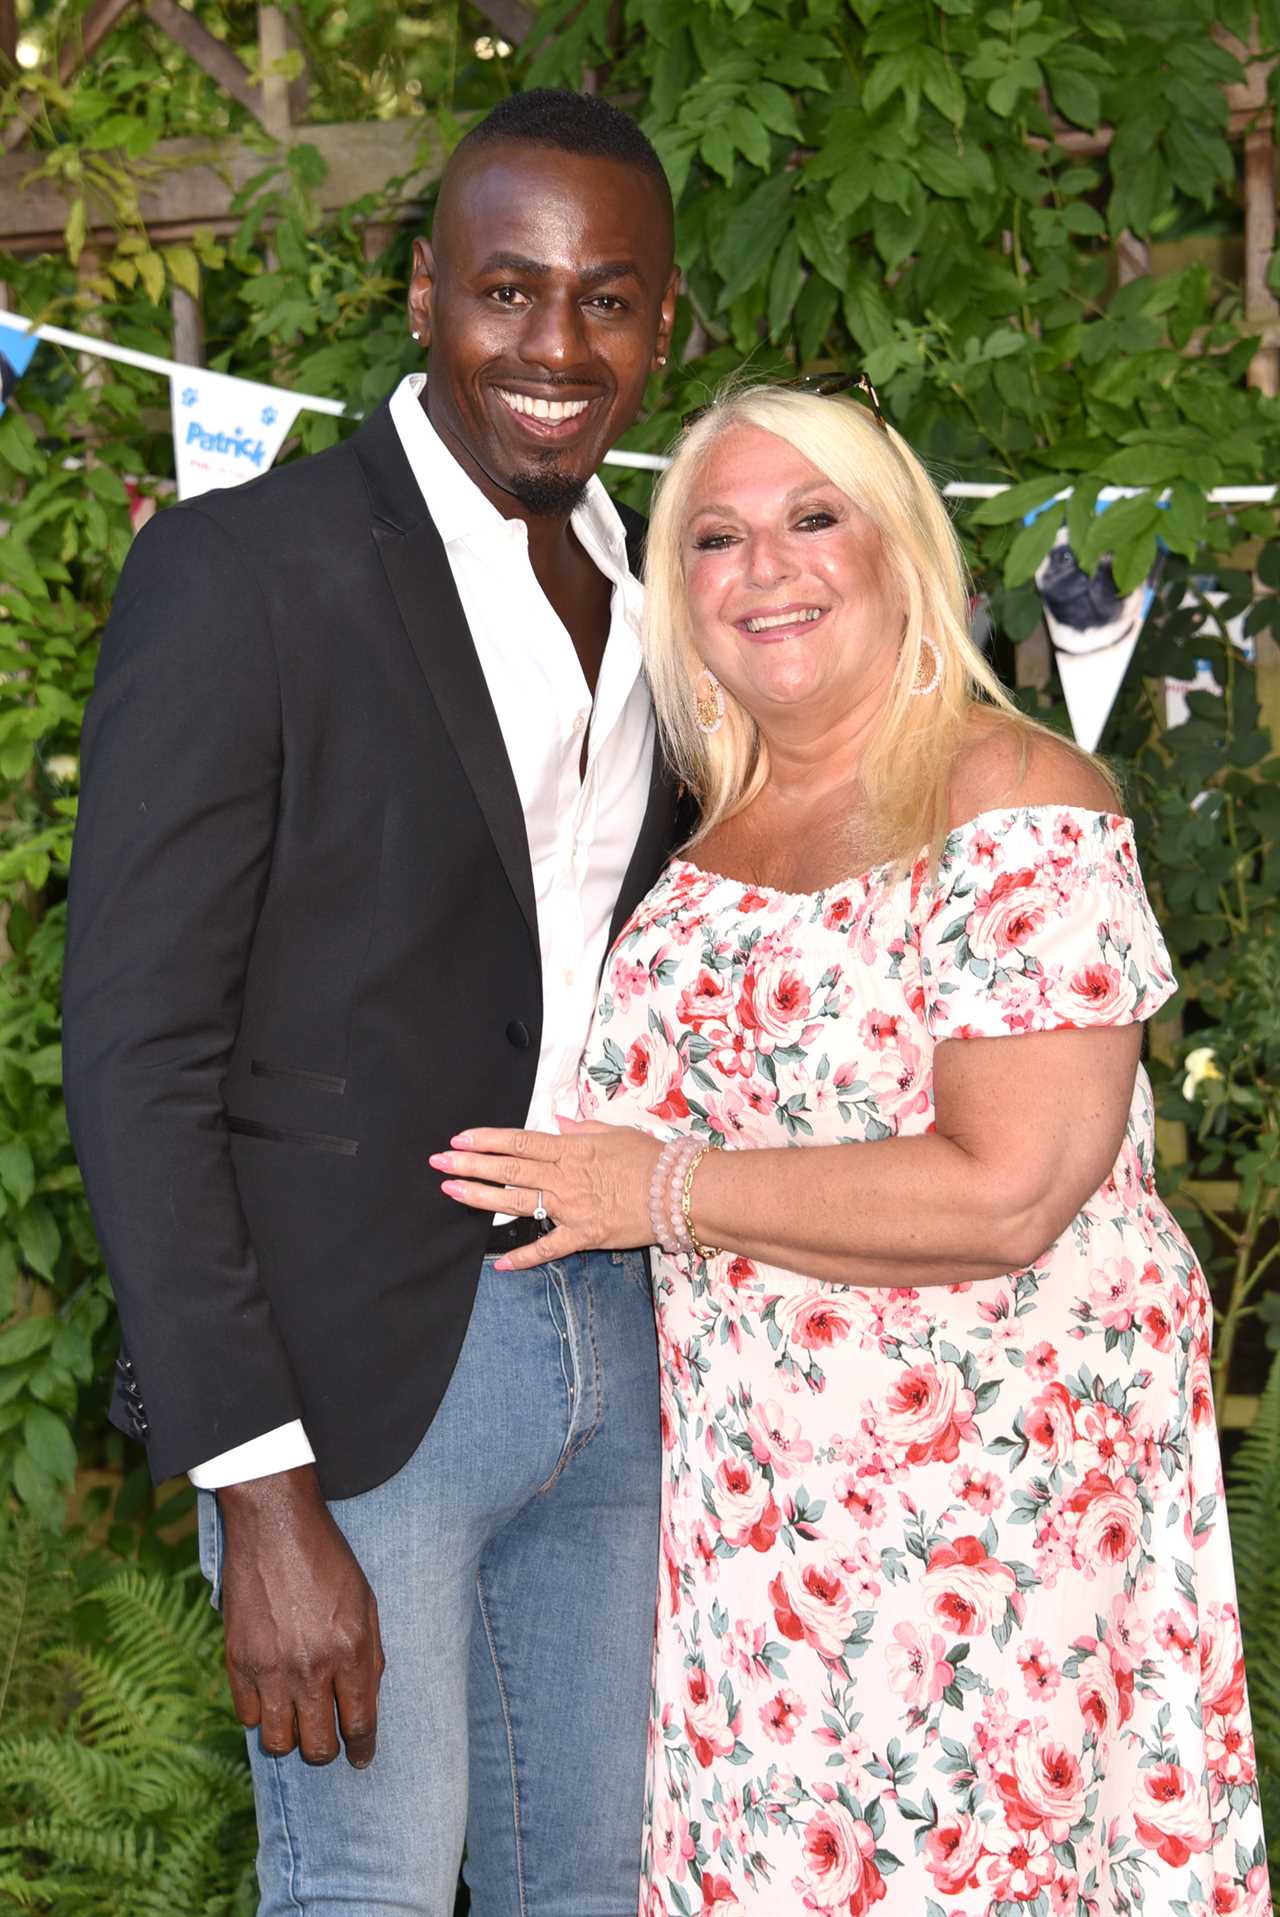 ‘Stalker’ of Vanessa Feltz’s ex is arrested after he was sent string of terrifying messages